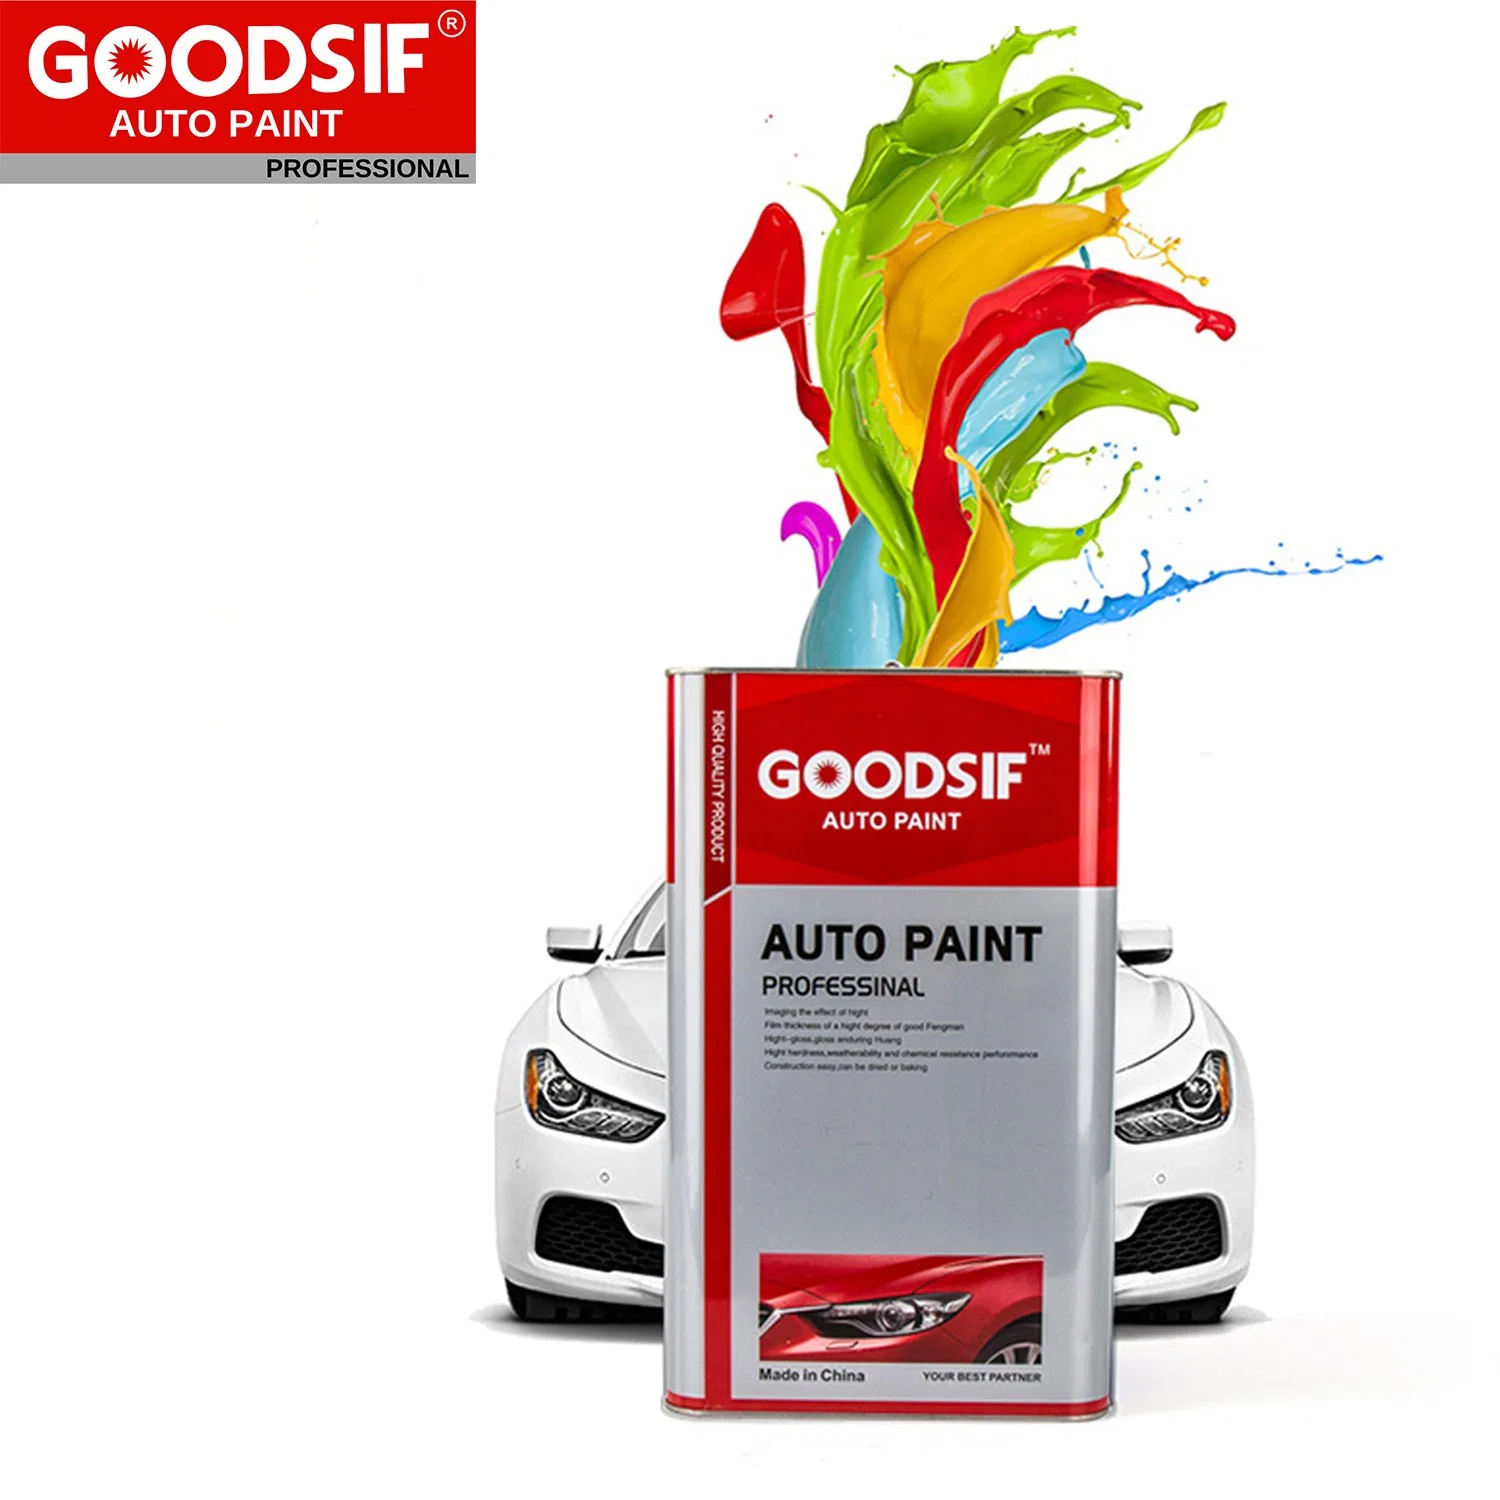 Auto Dilute Goodsif Car Paint Manufacturer Standard Dry Solvent Thinner Acrylic Automotive Paint Varnish